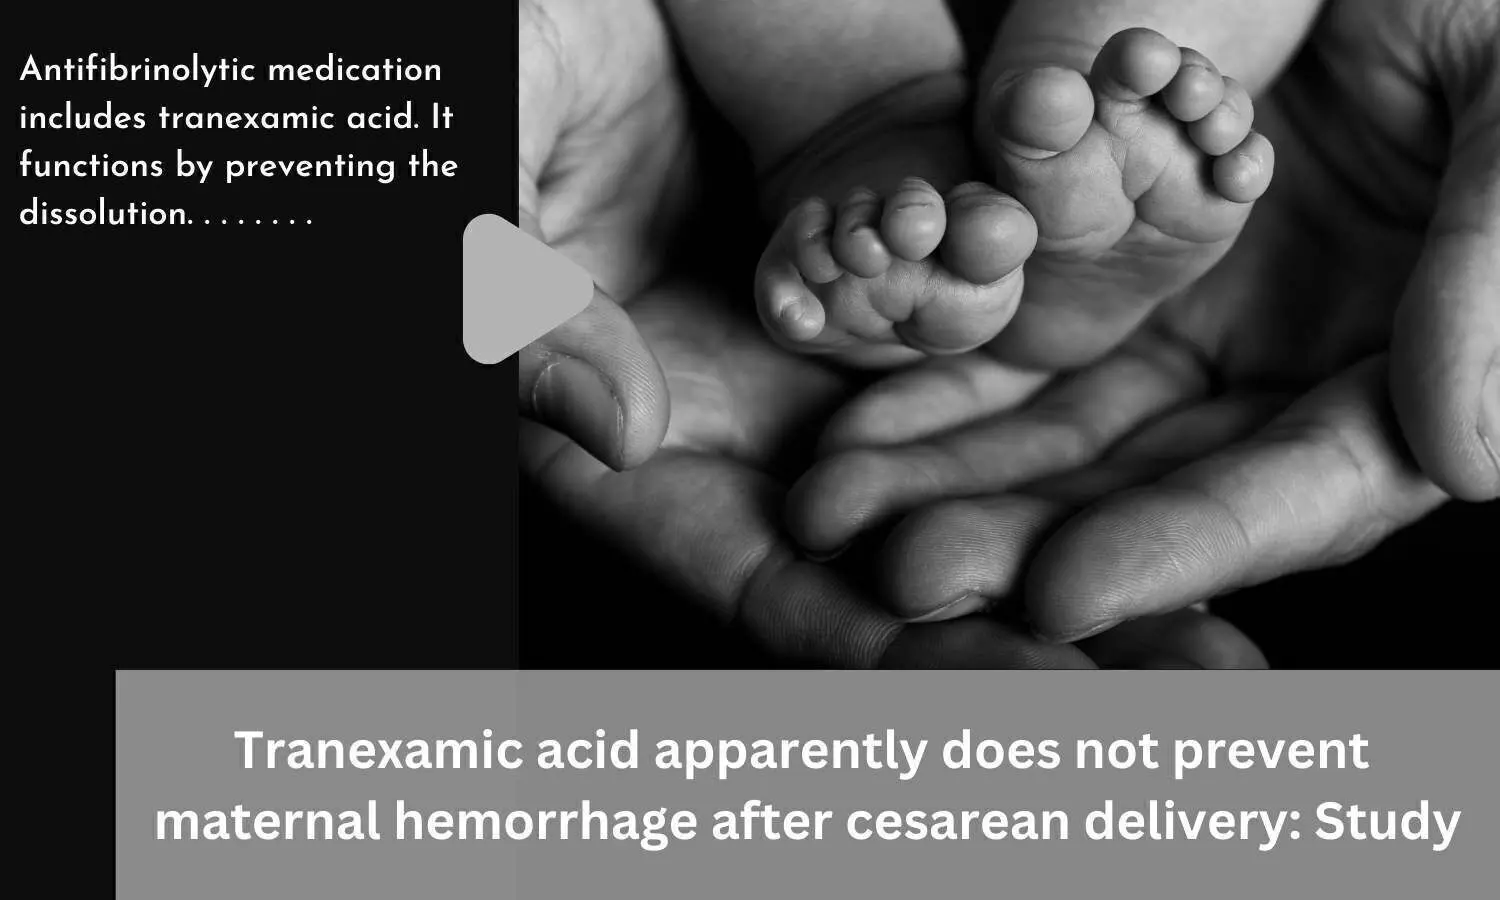 Tranexamic acid apparently does not prevent maternal hemorrhage after cesarean delivery: Study